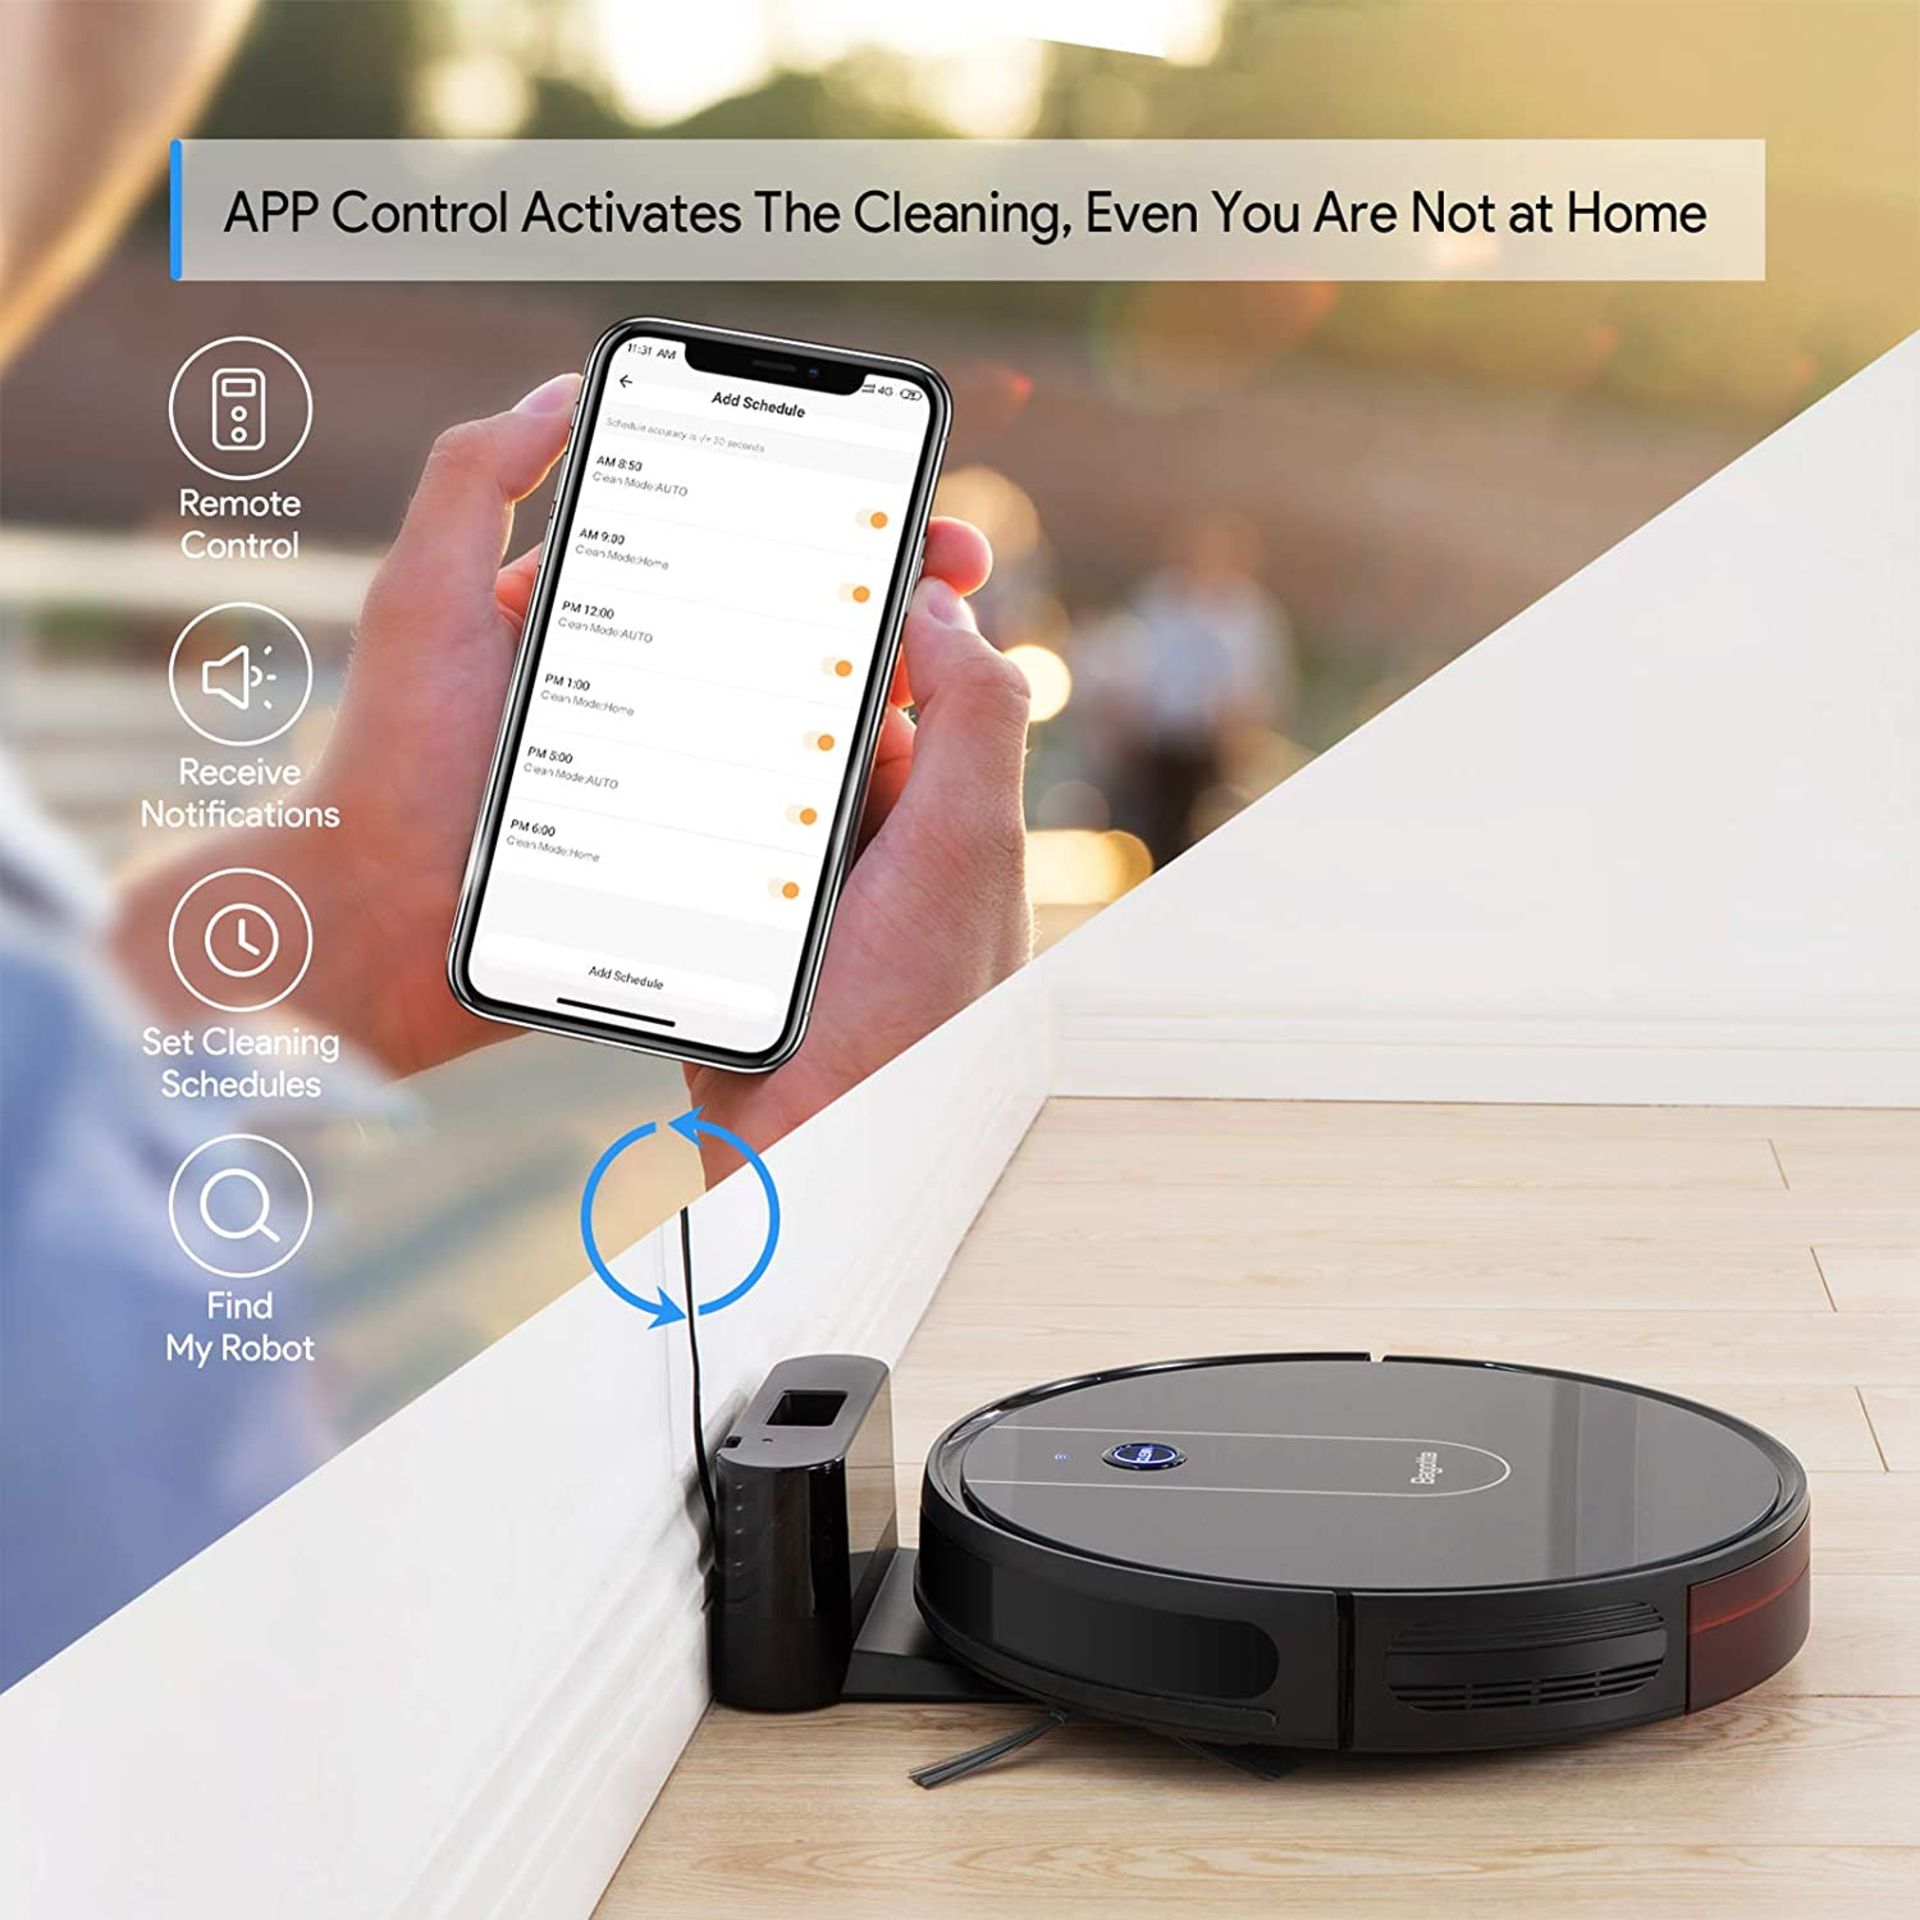 Bagotte BG700 Wi-Fi Robot Vacuum with mop - 2.7" Thin, Strong Suction, Work with Alexa - Image 8 of 8